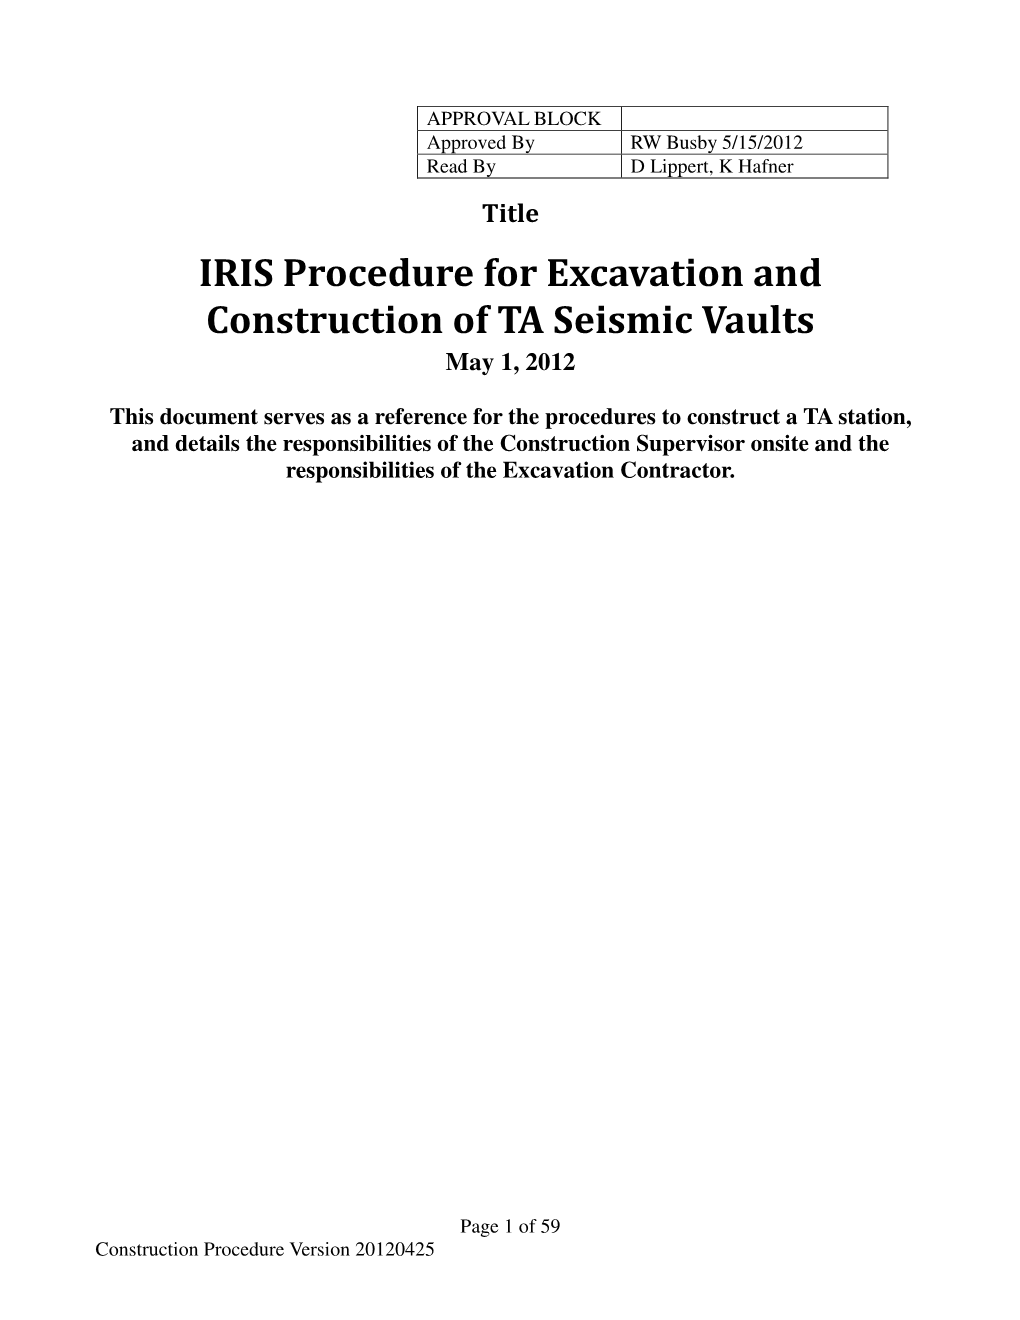 IRIS Procedure for Excavation and Construction of TA Seismic Vaults May 1, 2012